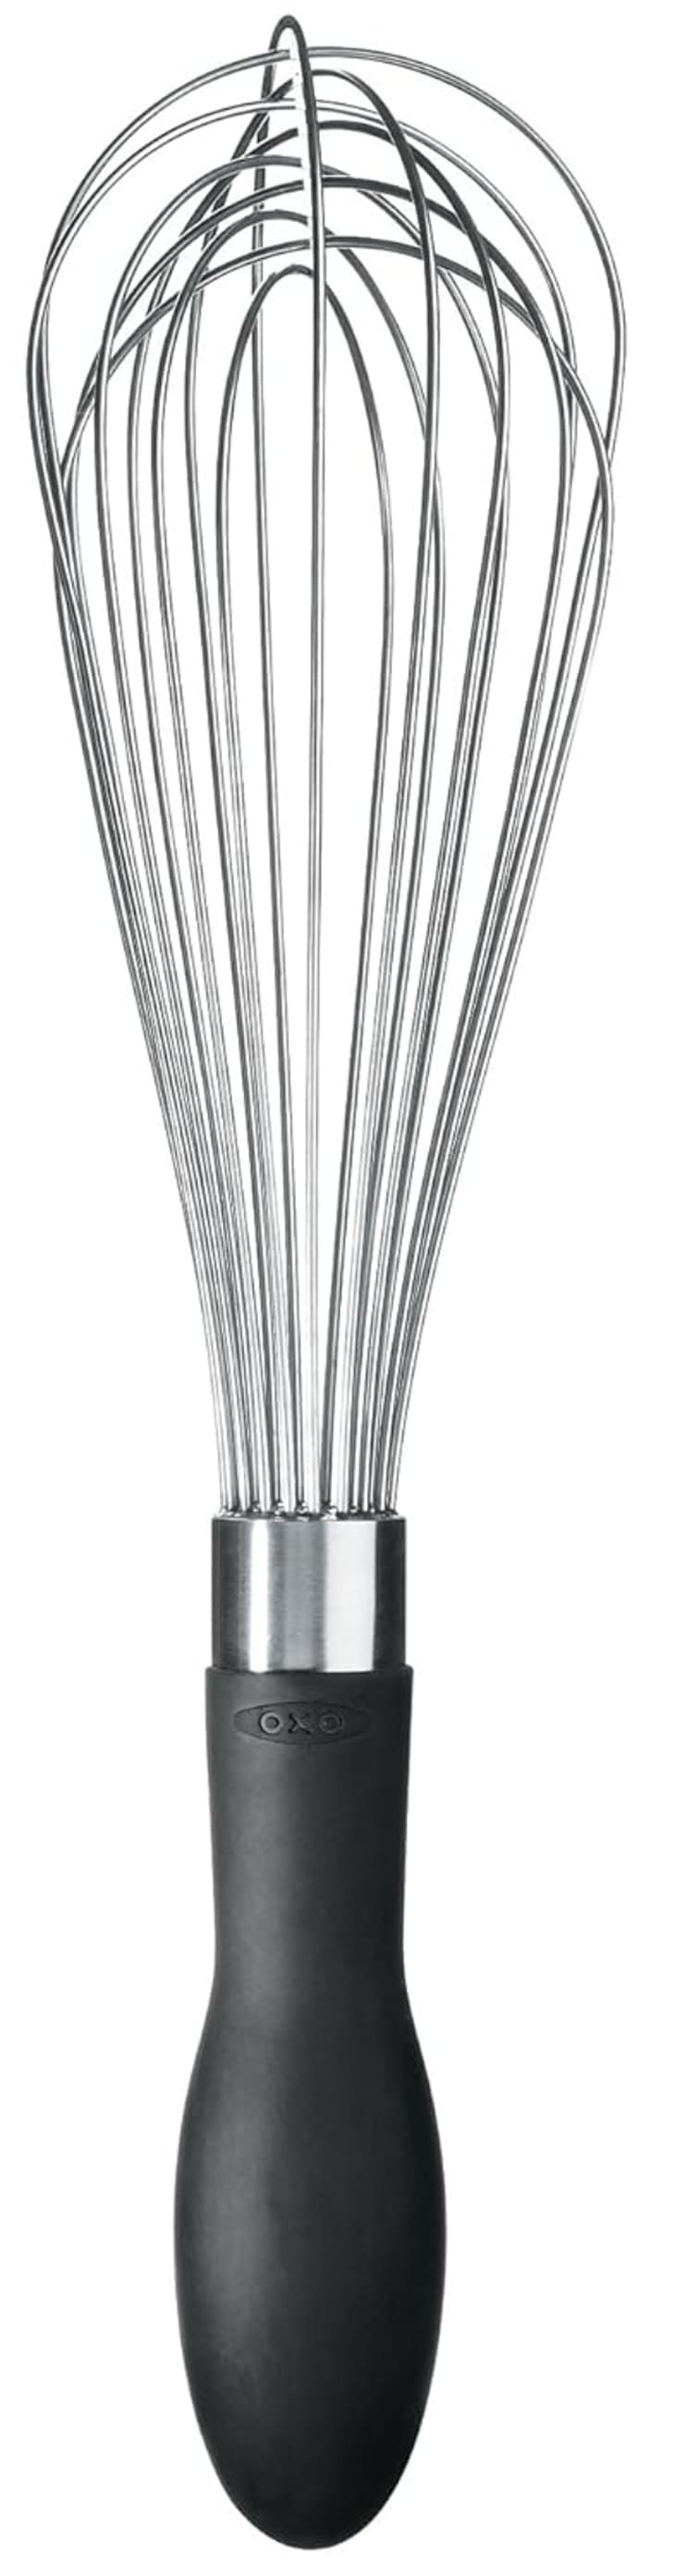 Product Image: OXO Good Grips 11-Inch Balloon Whisk